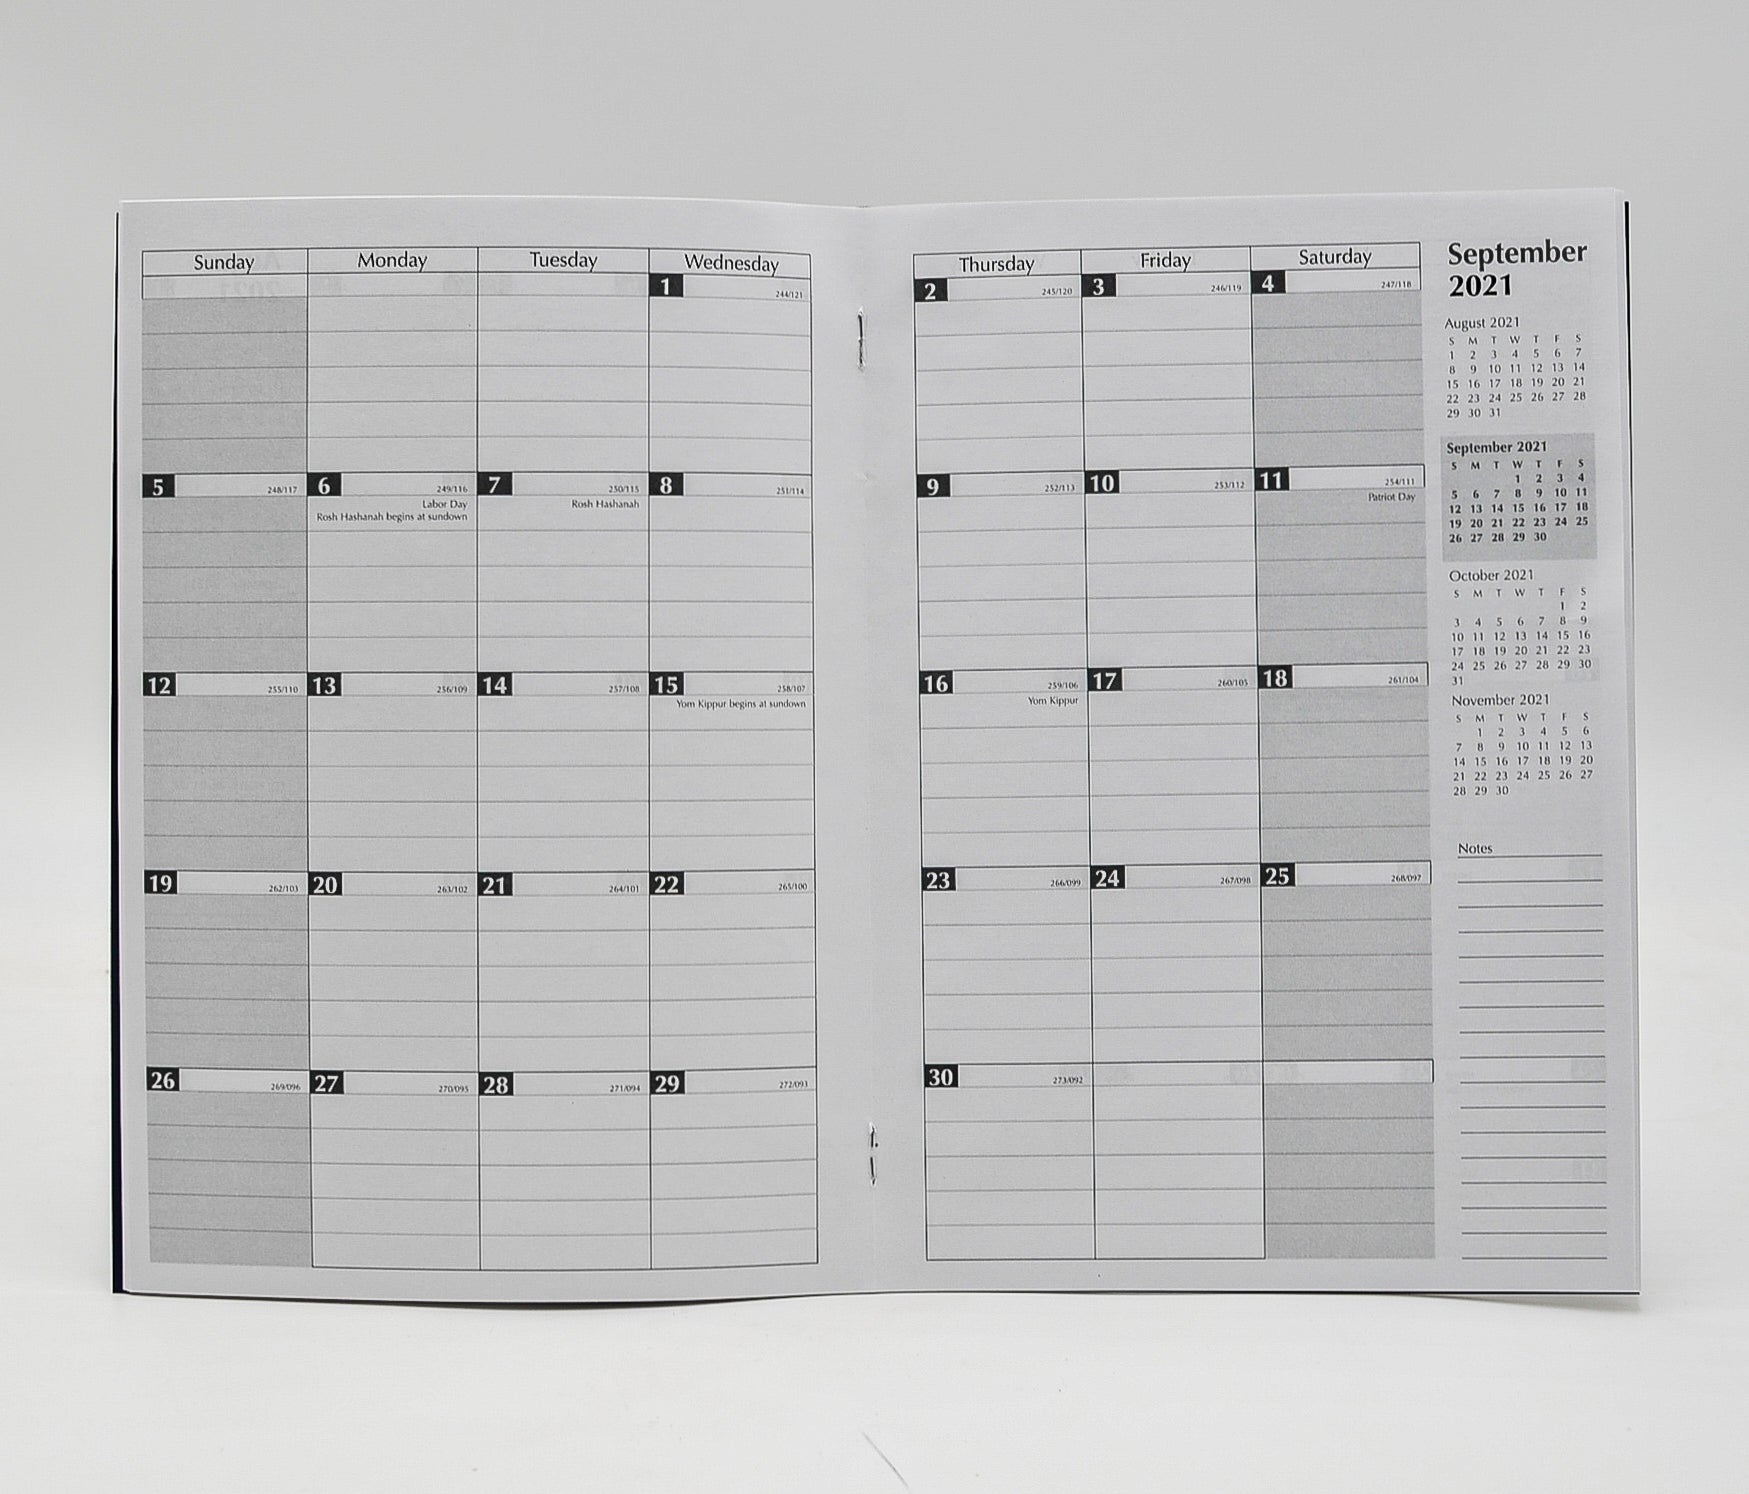 Monthly Calendar: 7" x 10" Staple Bound Leatherette Planner   January 2021-January 2022  Available in Forrest Green and Navy Blue  This Month-at-a-glance calendar includes additional pages, such as: personal information page, three year calendar, future planning for 2021 and 2022, metric conversion, special information, air distances, investment record, dividends & investment record, expense summary, telephone/address, important dates, special dates, area codes/time zones